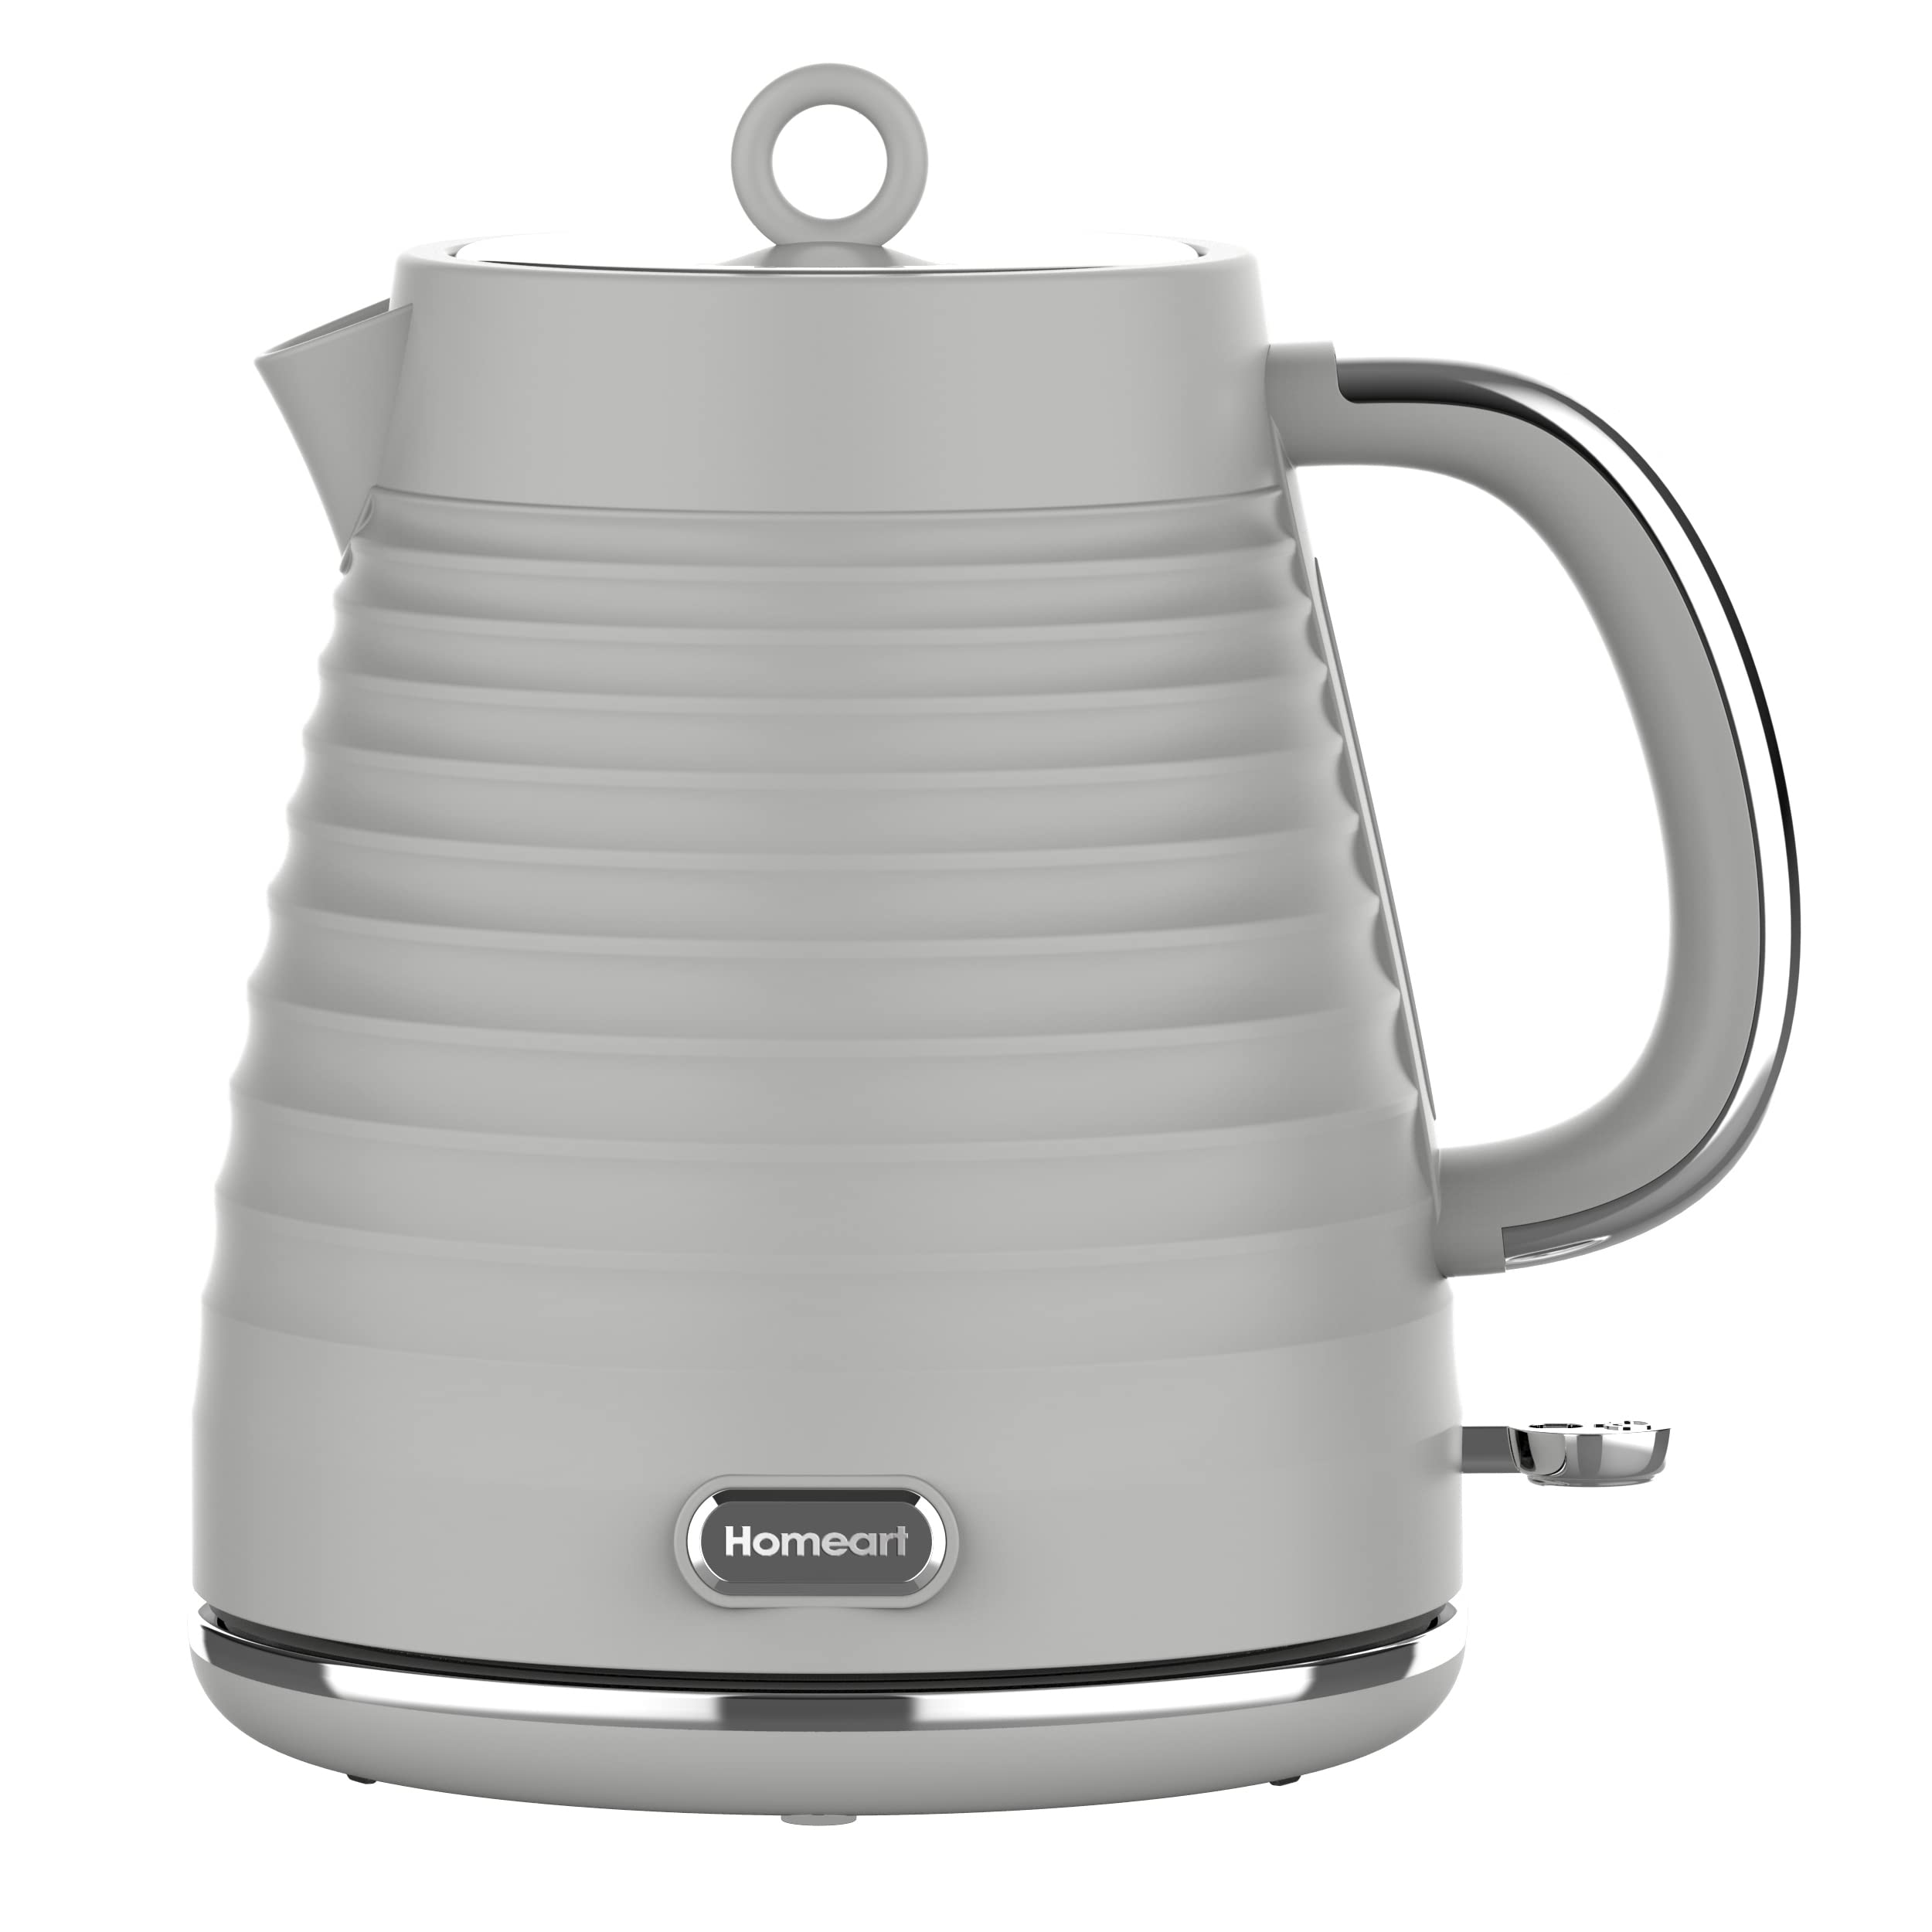 Homeart Riva 1.7L Electric Kettle with Removable Limescale Filter, Gray